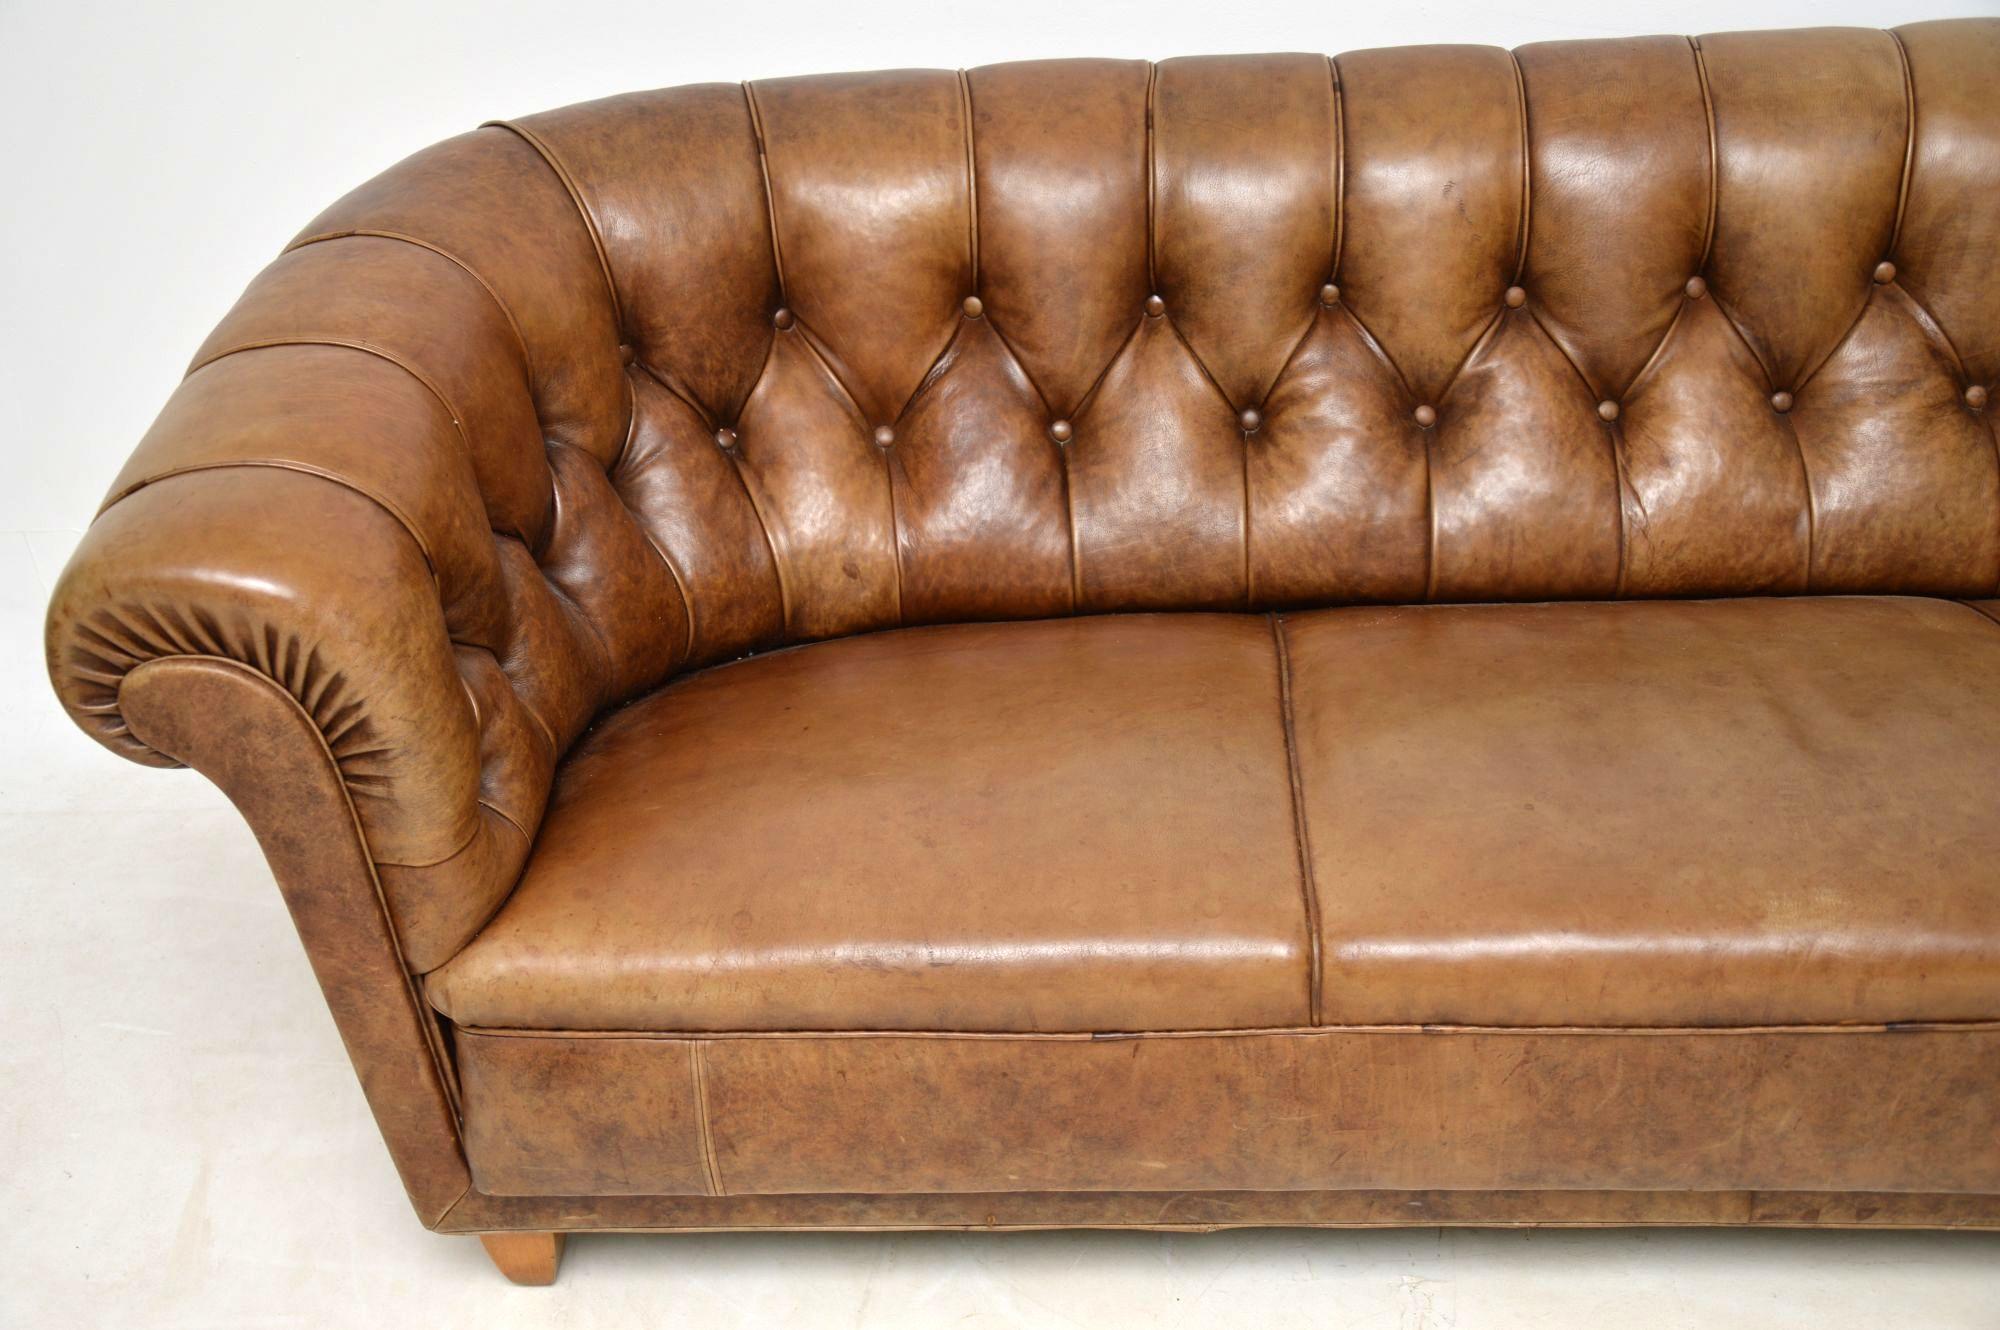 Victorian Antique Swedish Leather Chesterfield Sofa